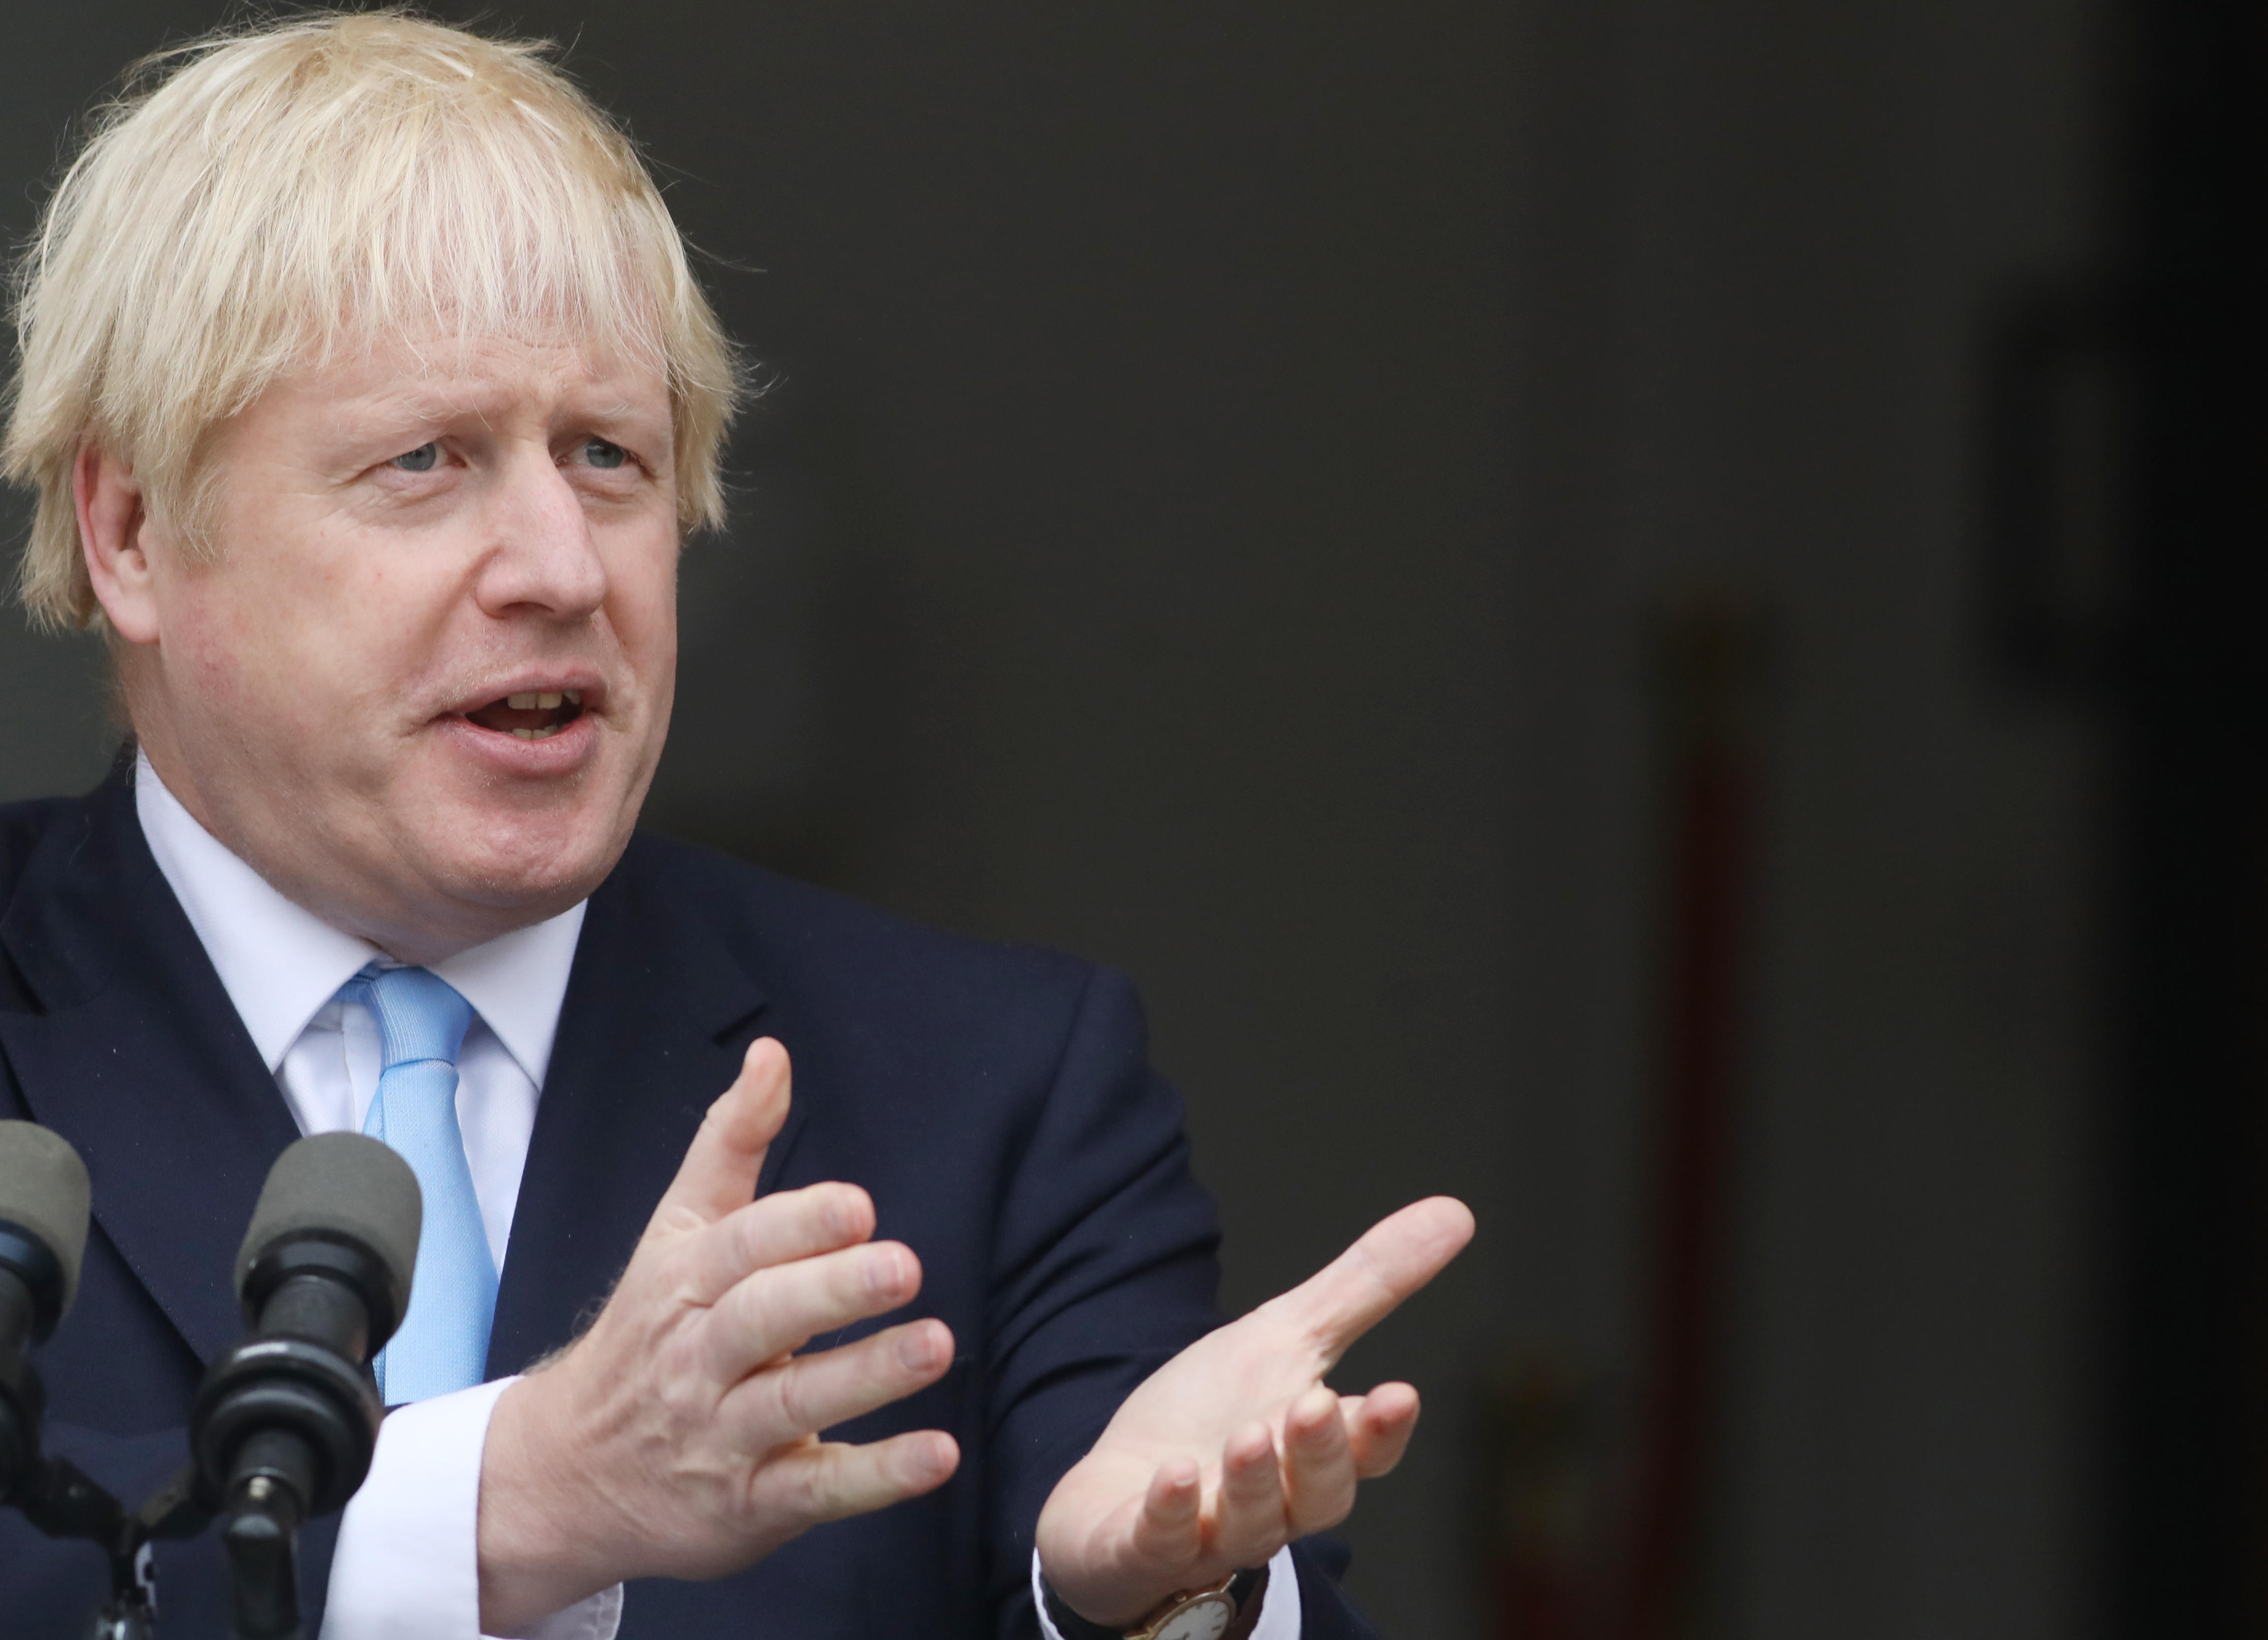 Boris Johnson accused of ‘watering down’ ministerial code while under investigation